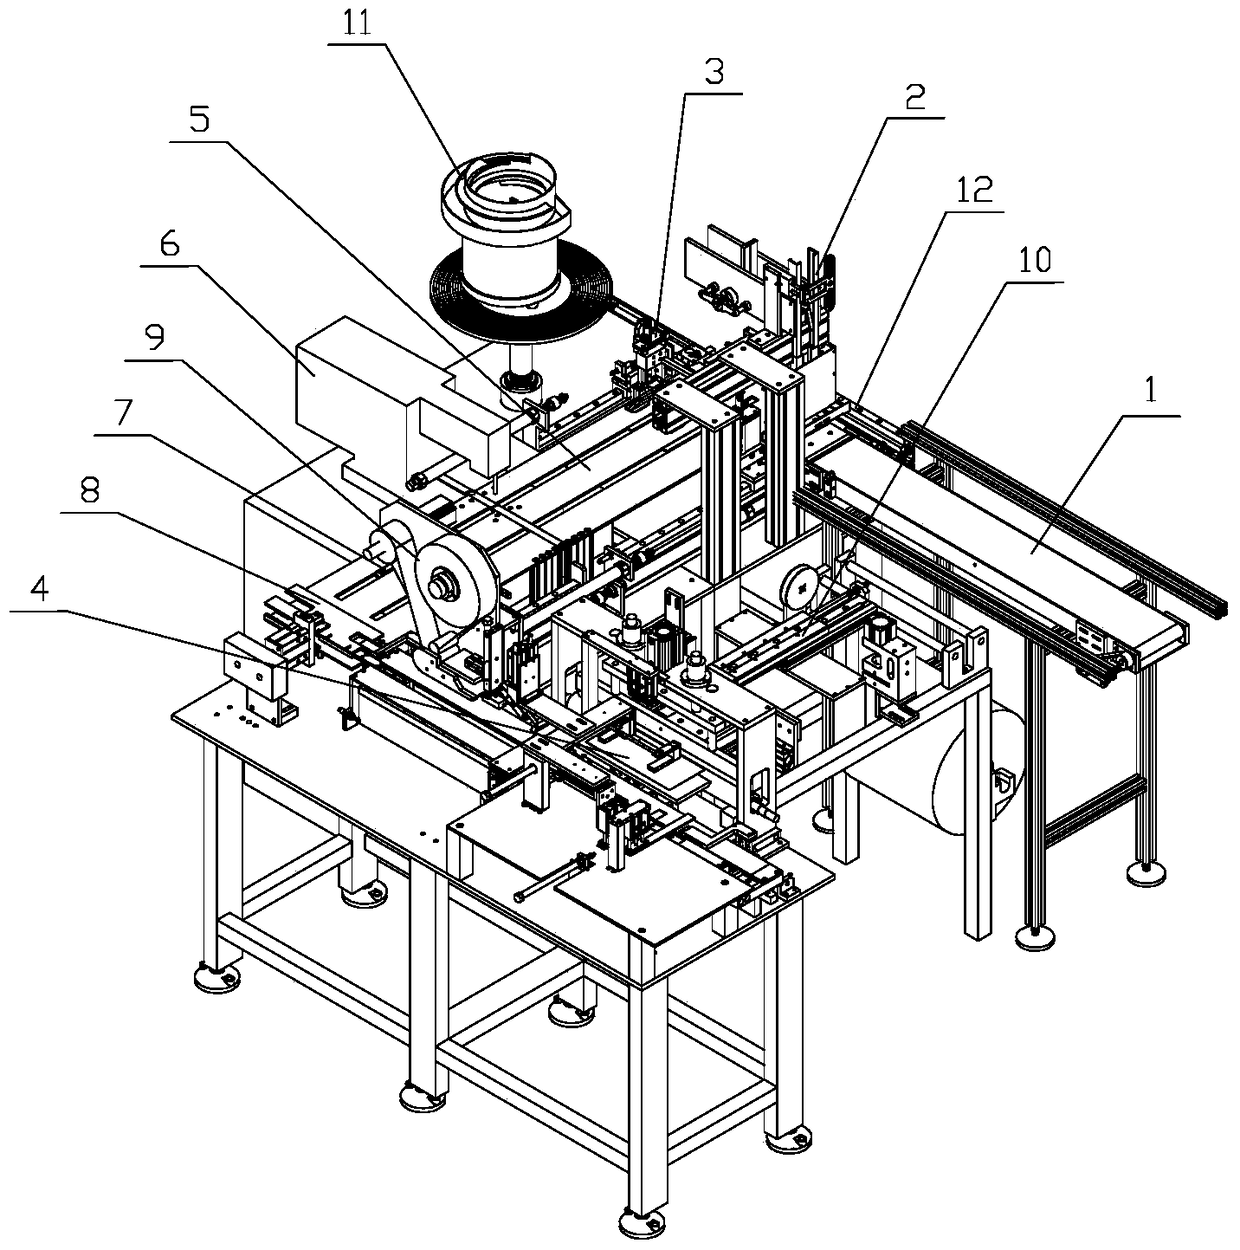 A fully automatic cotton socks packaging machine